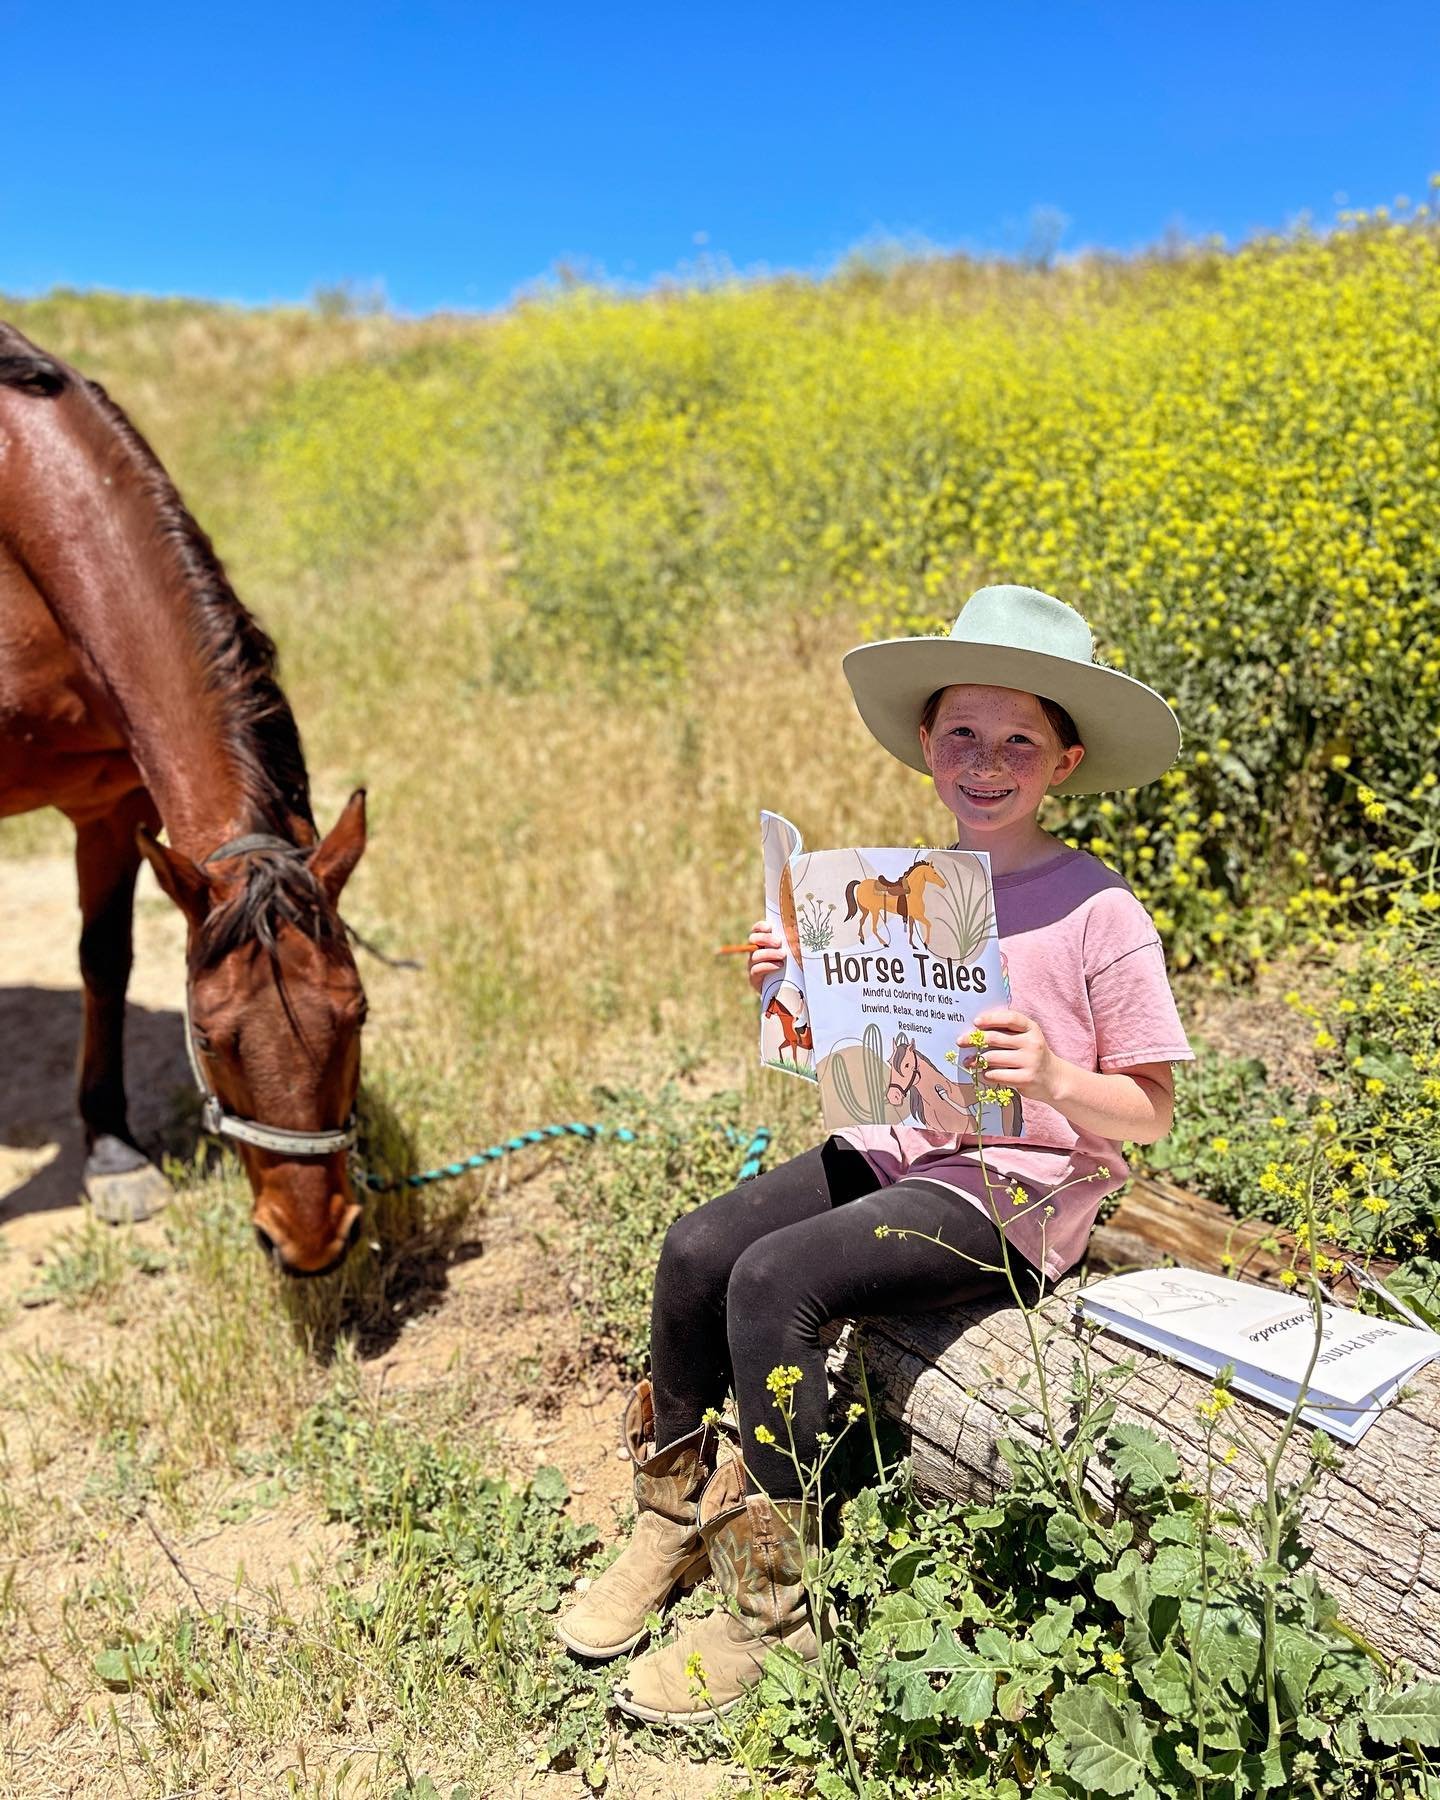 May is mental health awareness month! Do you have a kid that loves horses and would benefit from practicing mindfulness and other coping strategies? Check out this mindful coloring book created just for horse crazy kids (or adults young at heart)